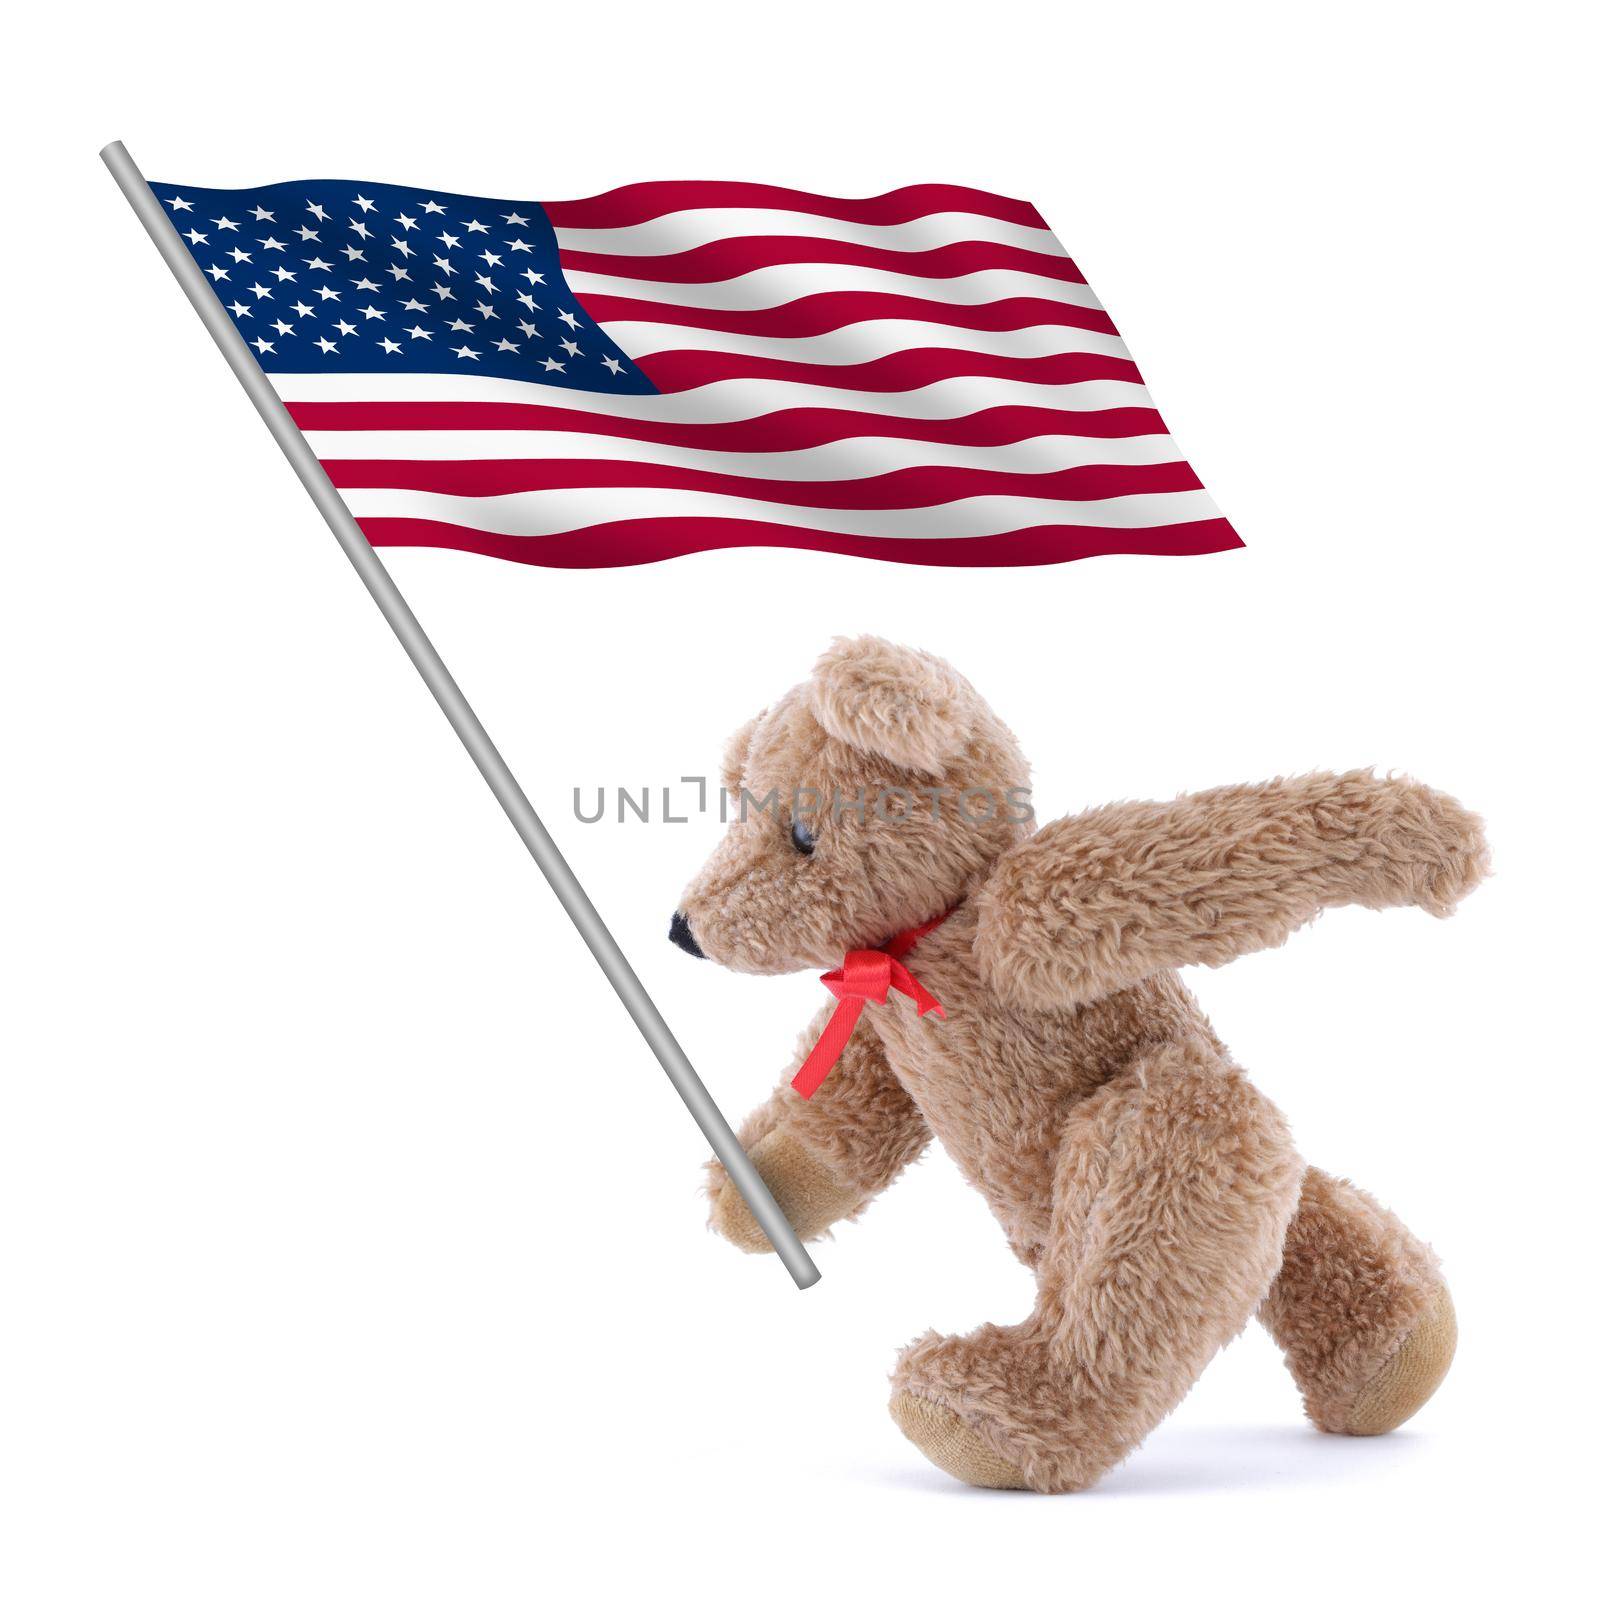 A United states of America flag stars and stripes old glory being carried by a cute teddy bear